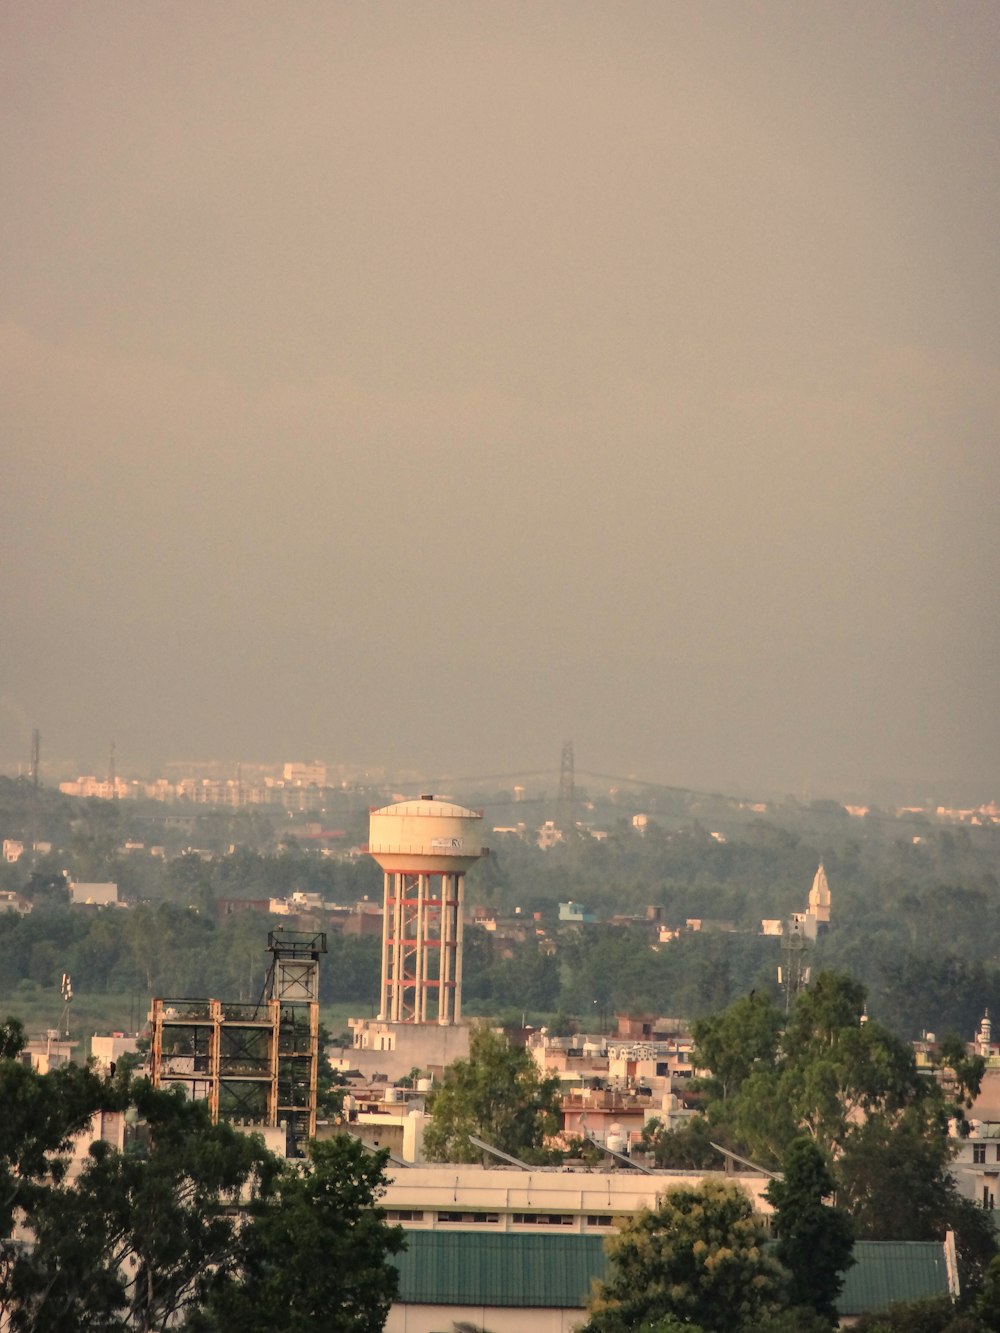 a view of a city with a water tower in the distance